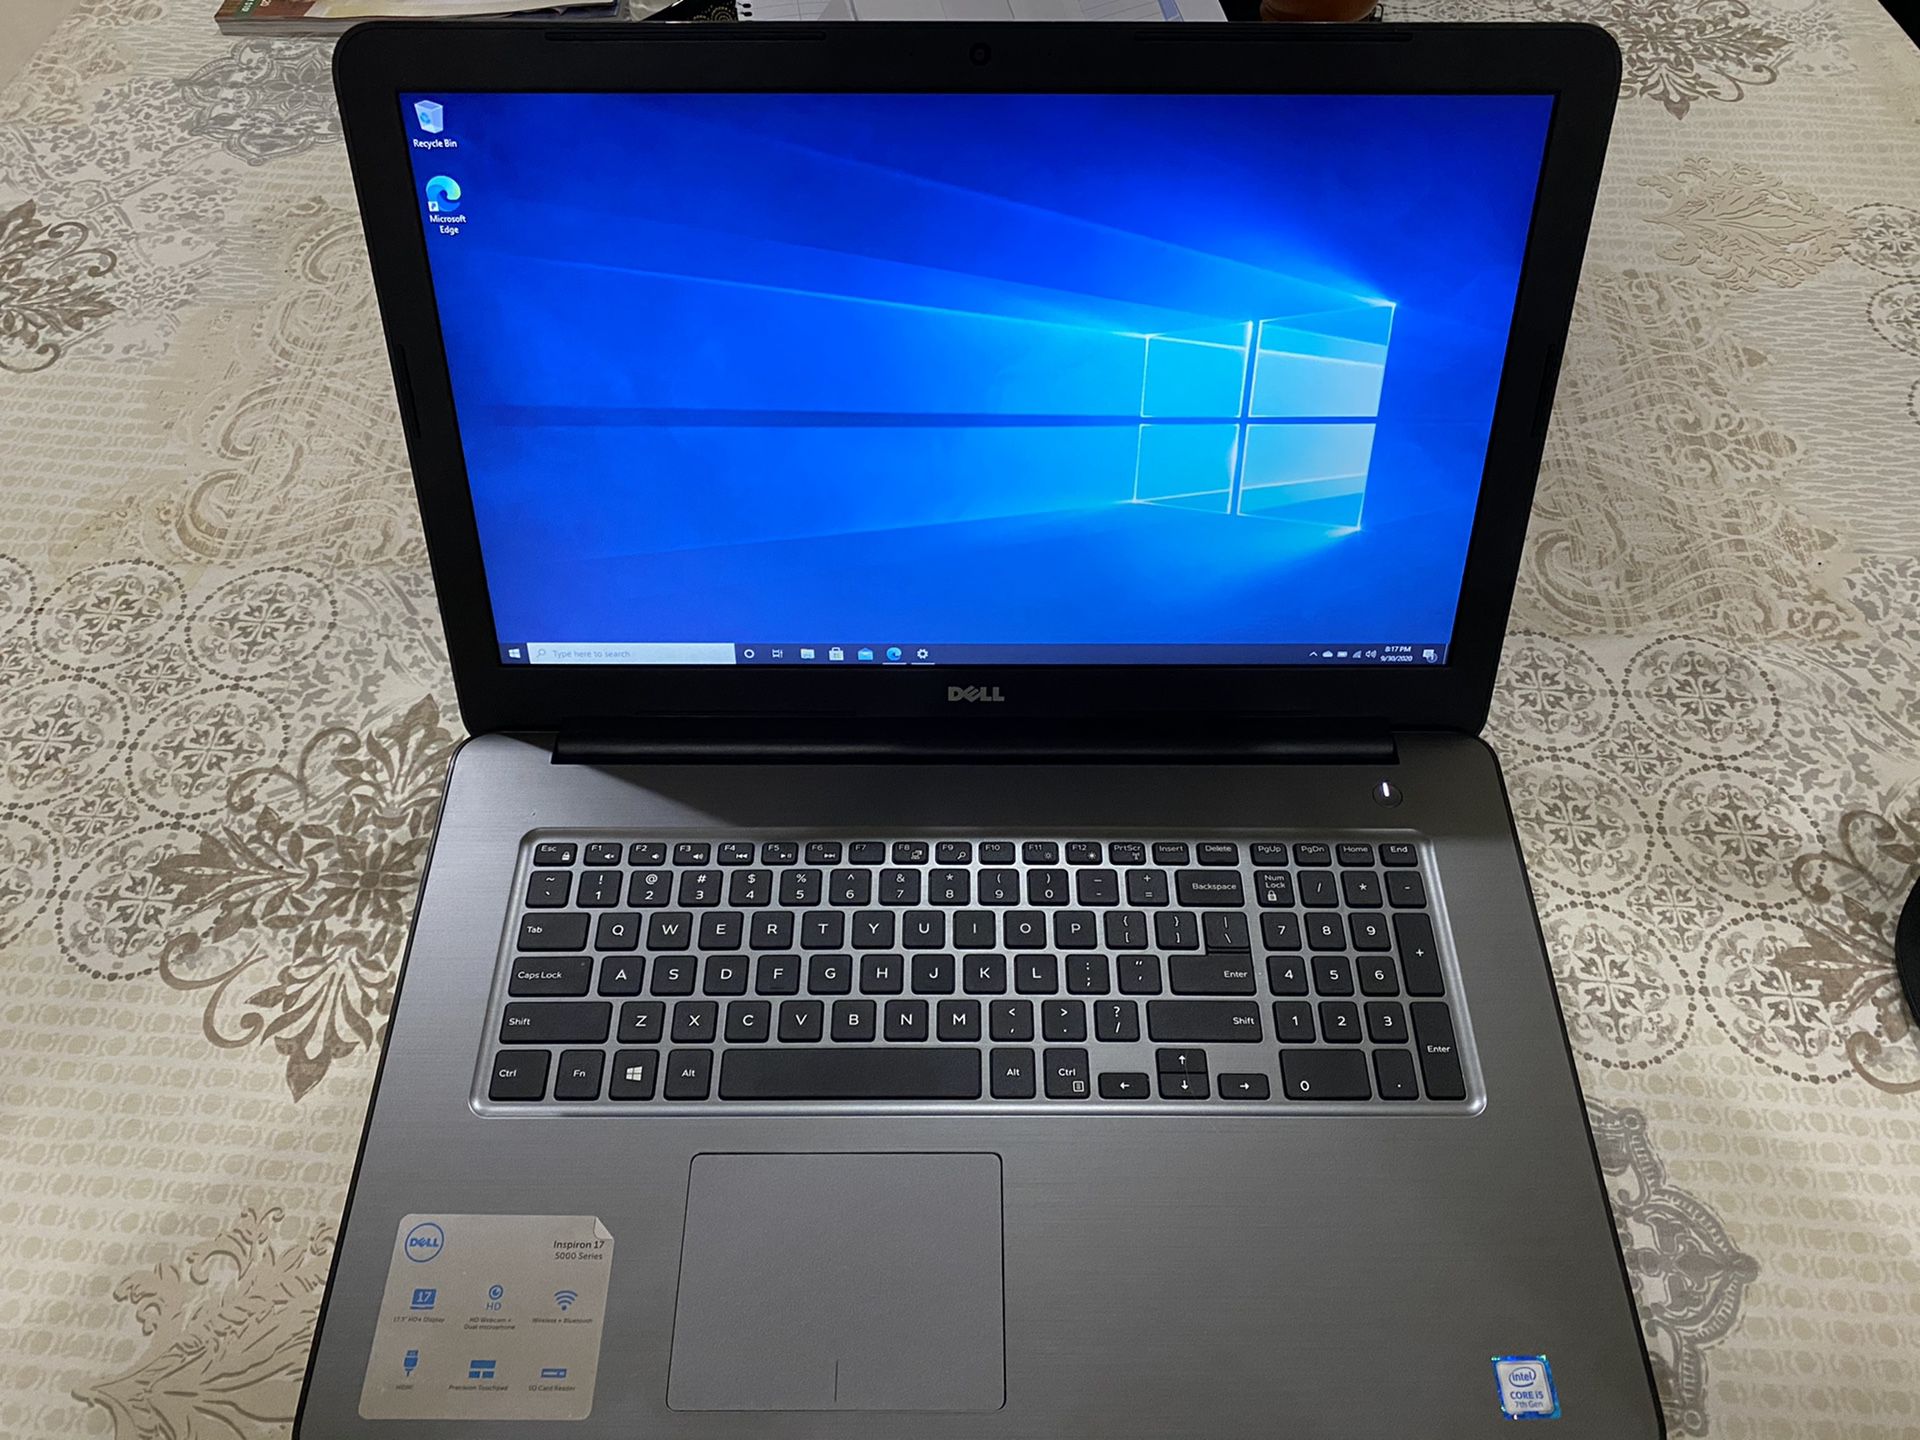 Dell Inspiron 17 5000 series i5 laptop for sale.